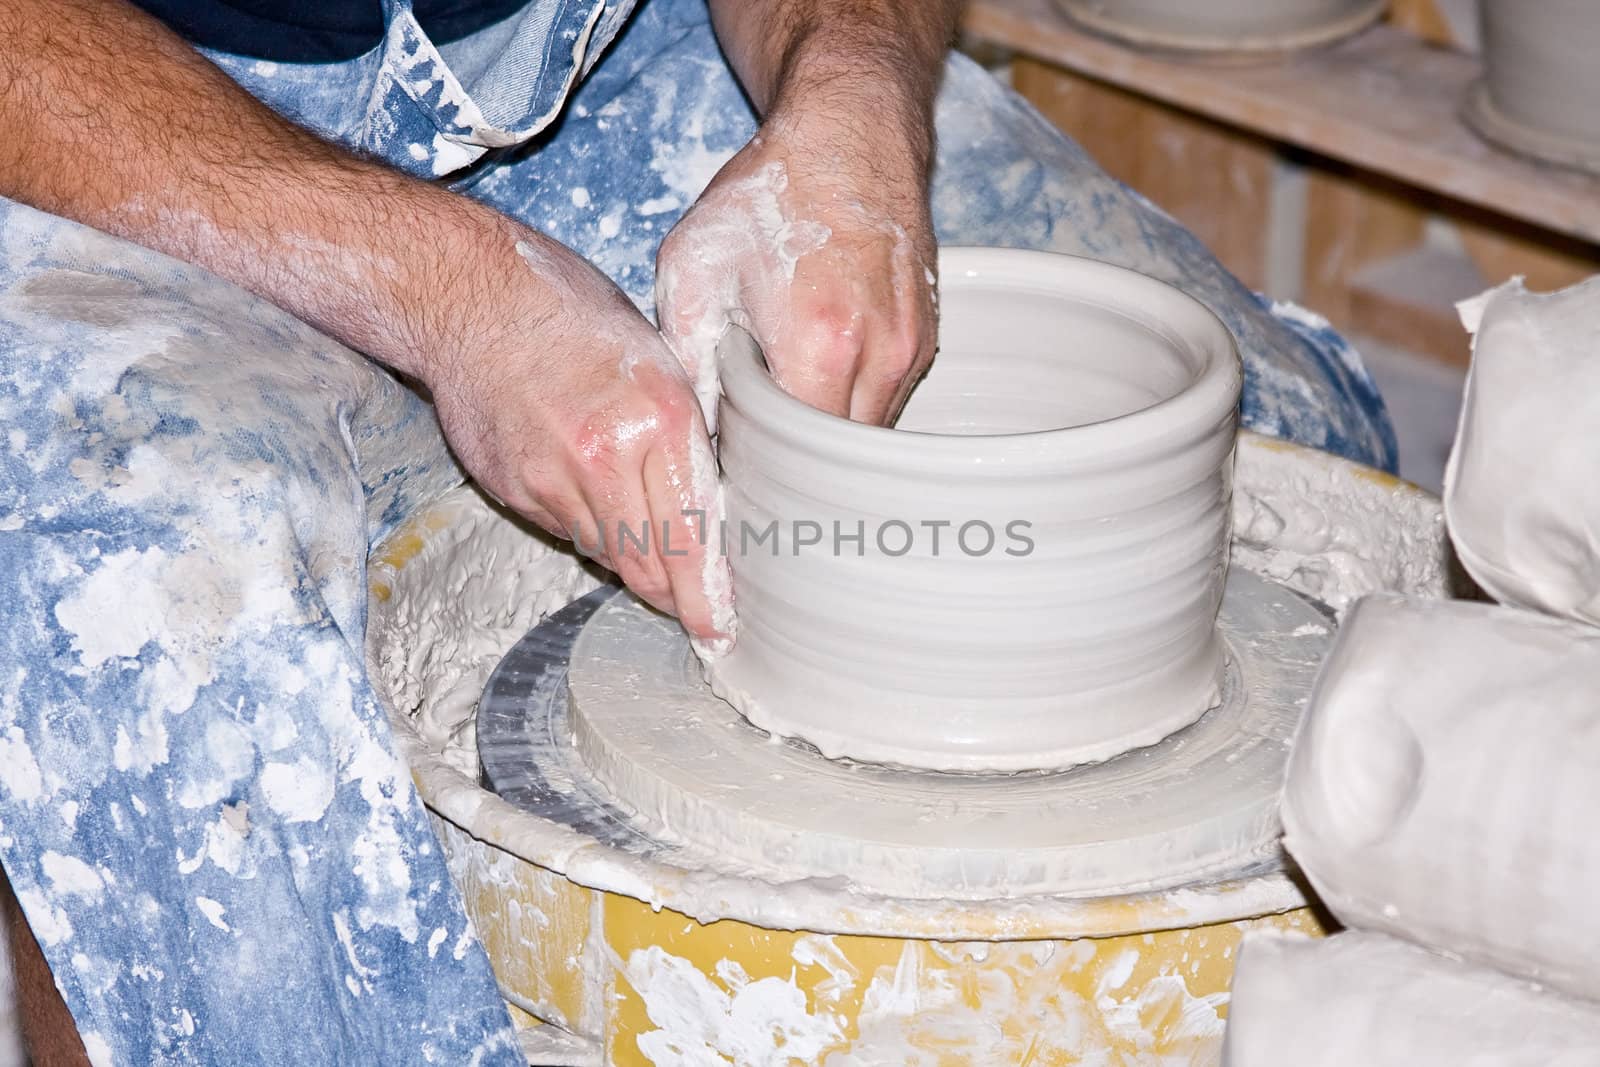 pottery by snokid